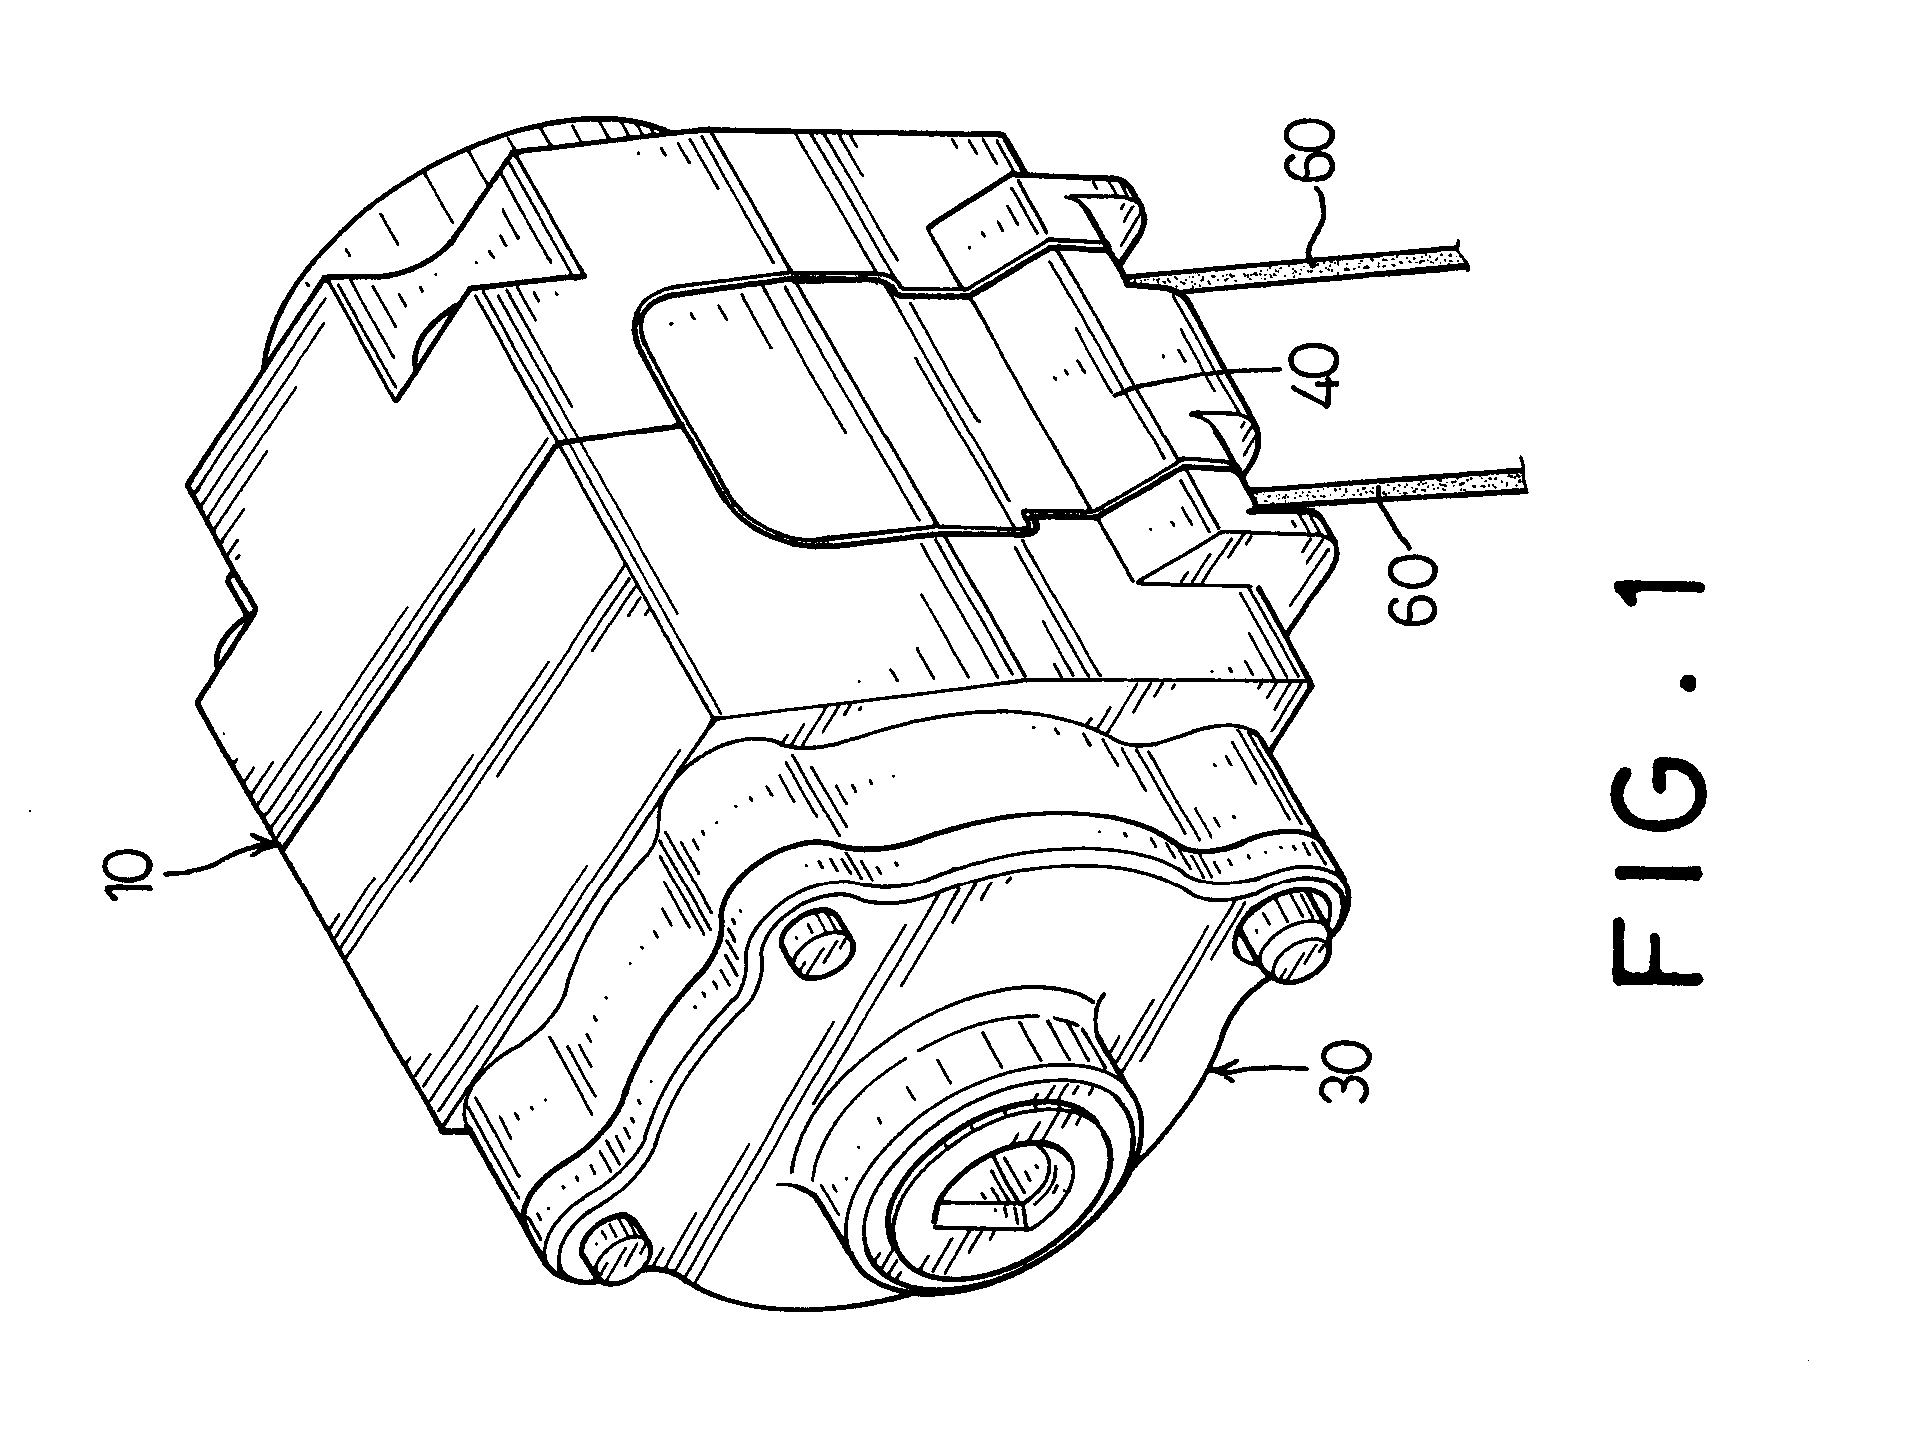 Hypocycloid drive device for adjusting slat angles for a venetian blind